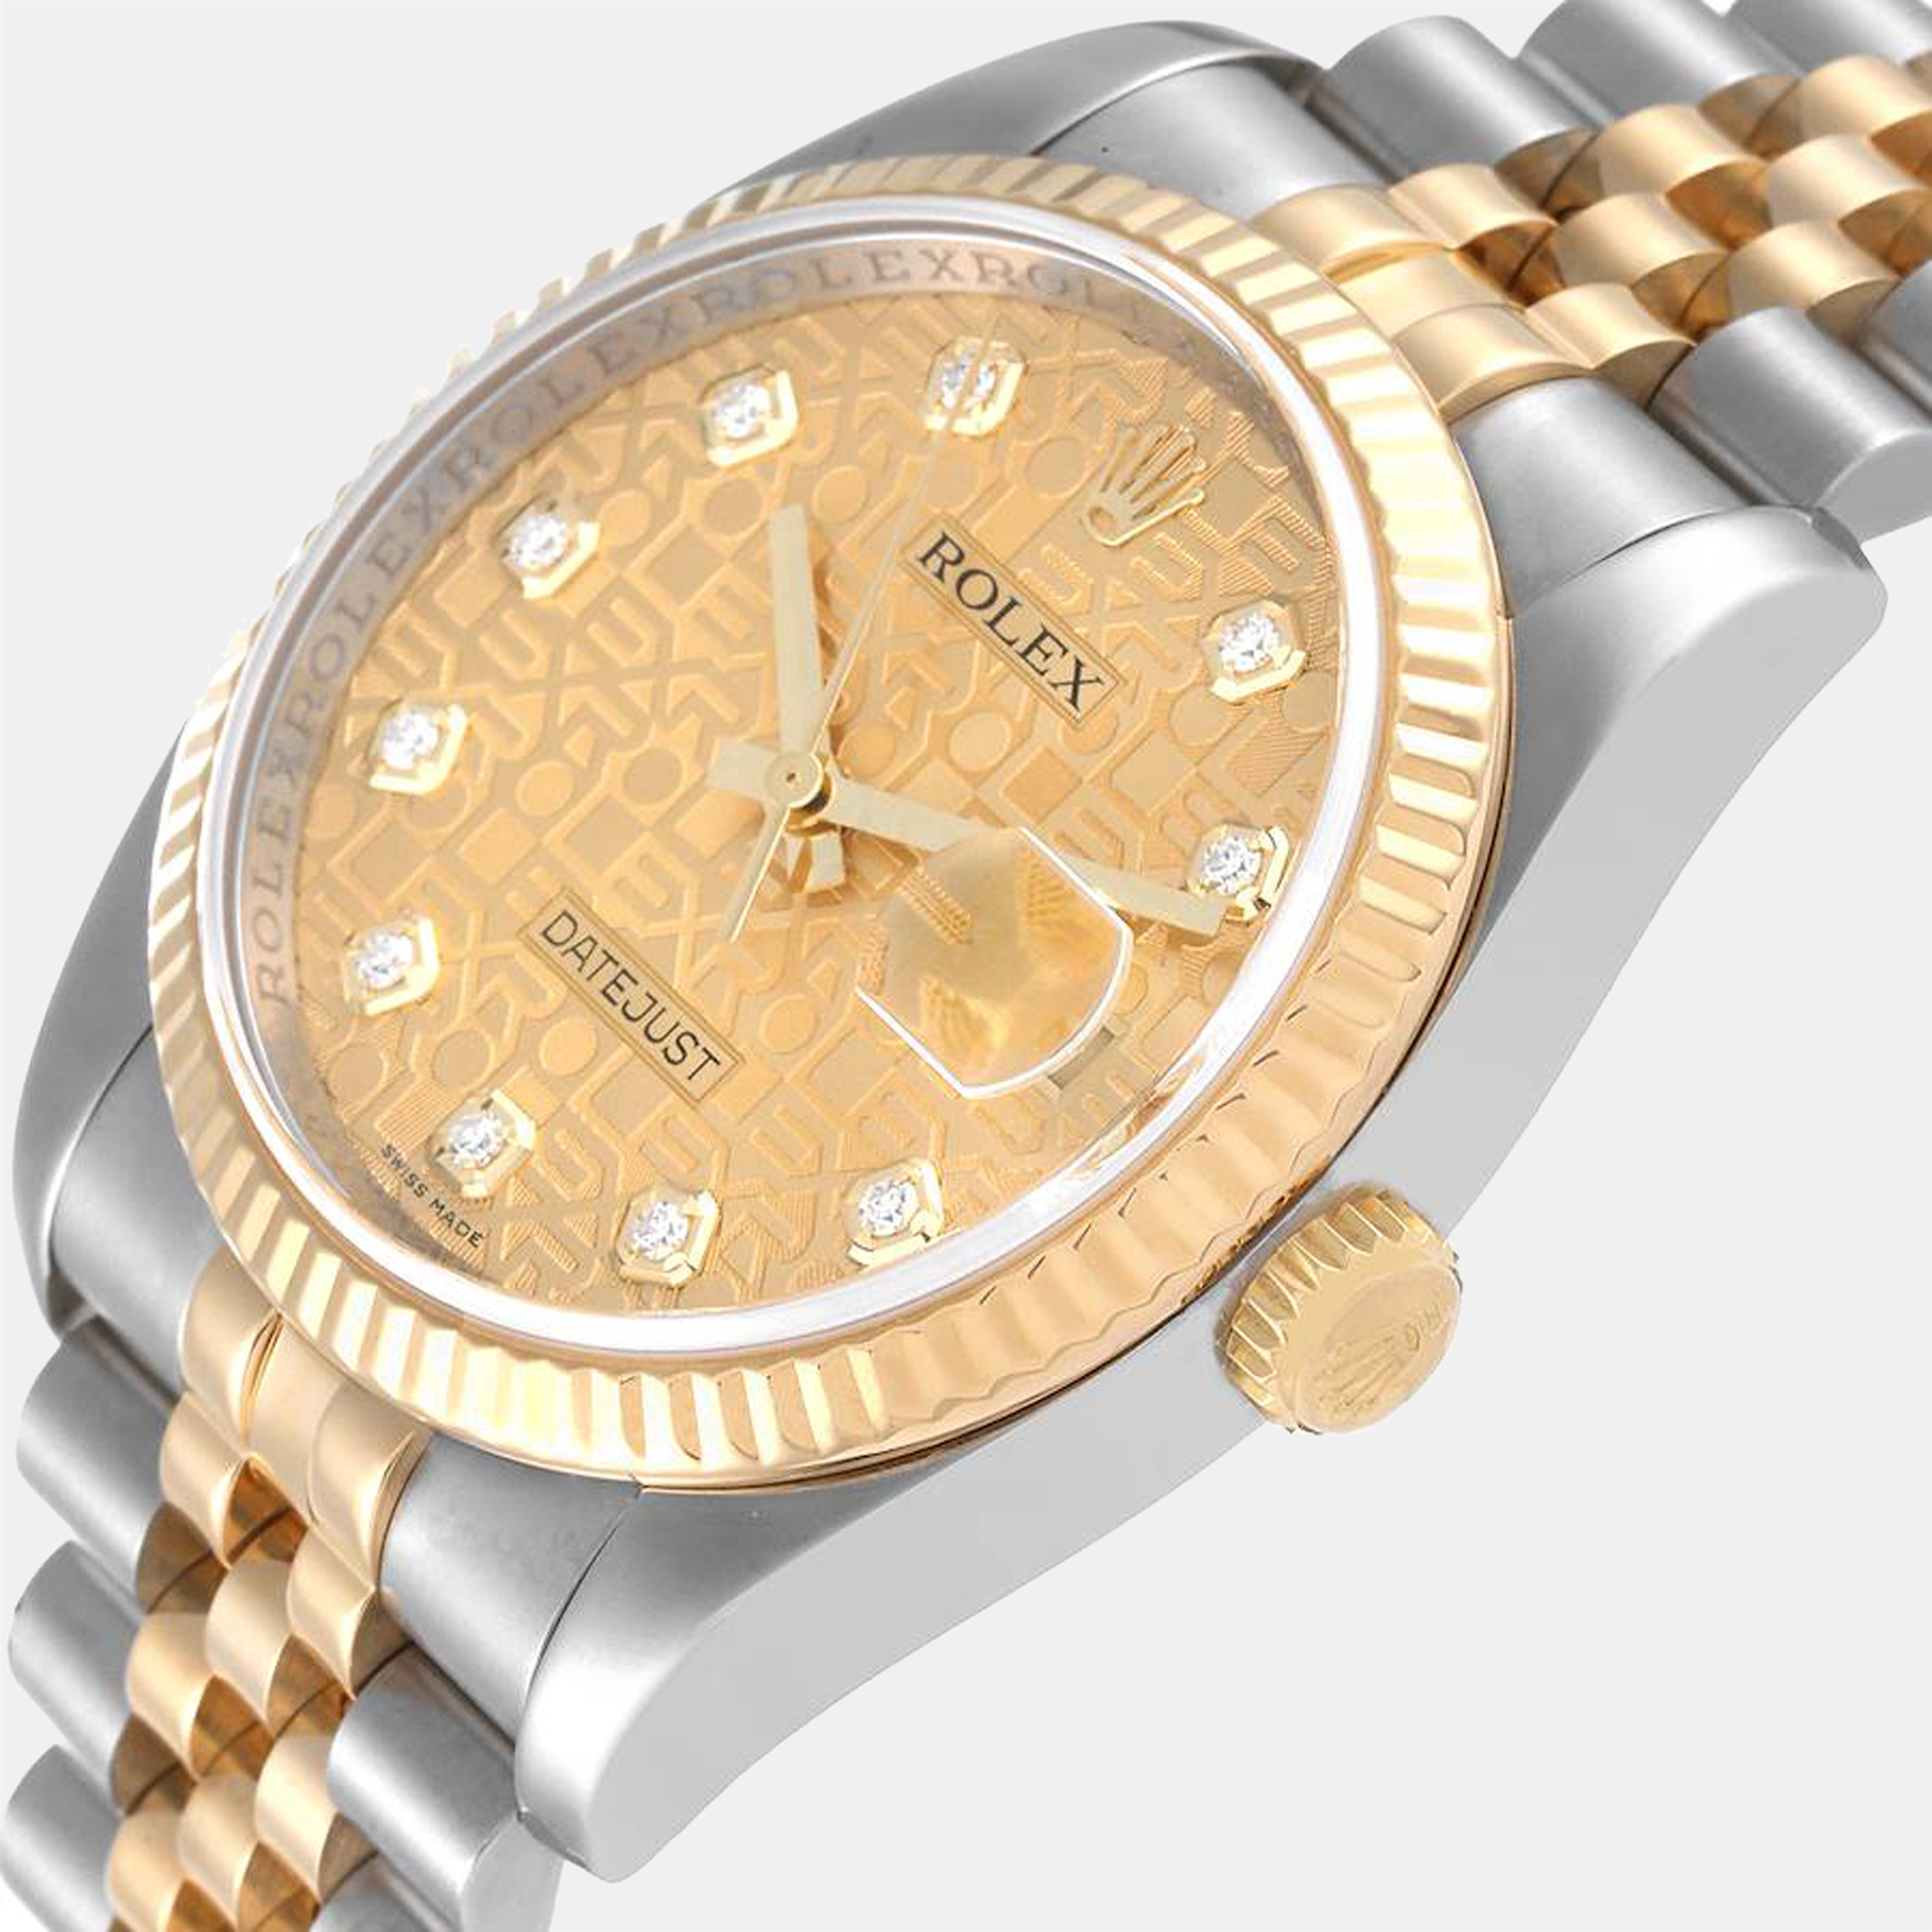 

Rolex Champagne Diamonds 18k Yellow Gold And Stainless Steel Datejust 116233 Men's Wristwatch 36 mm